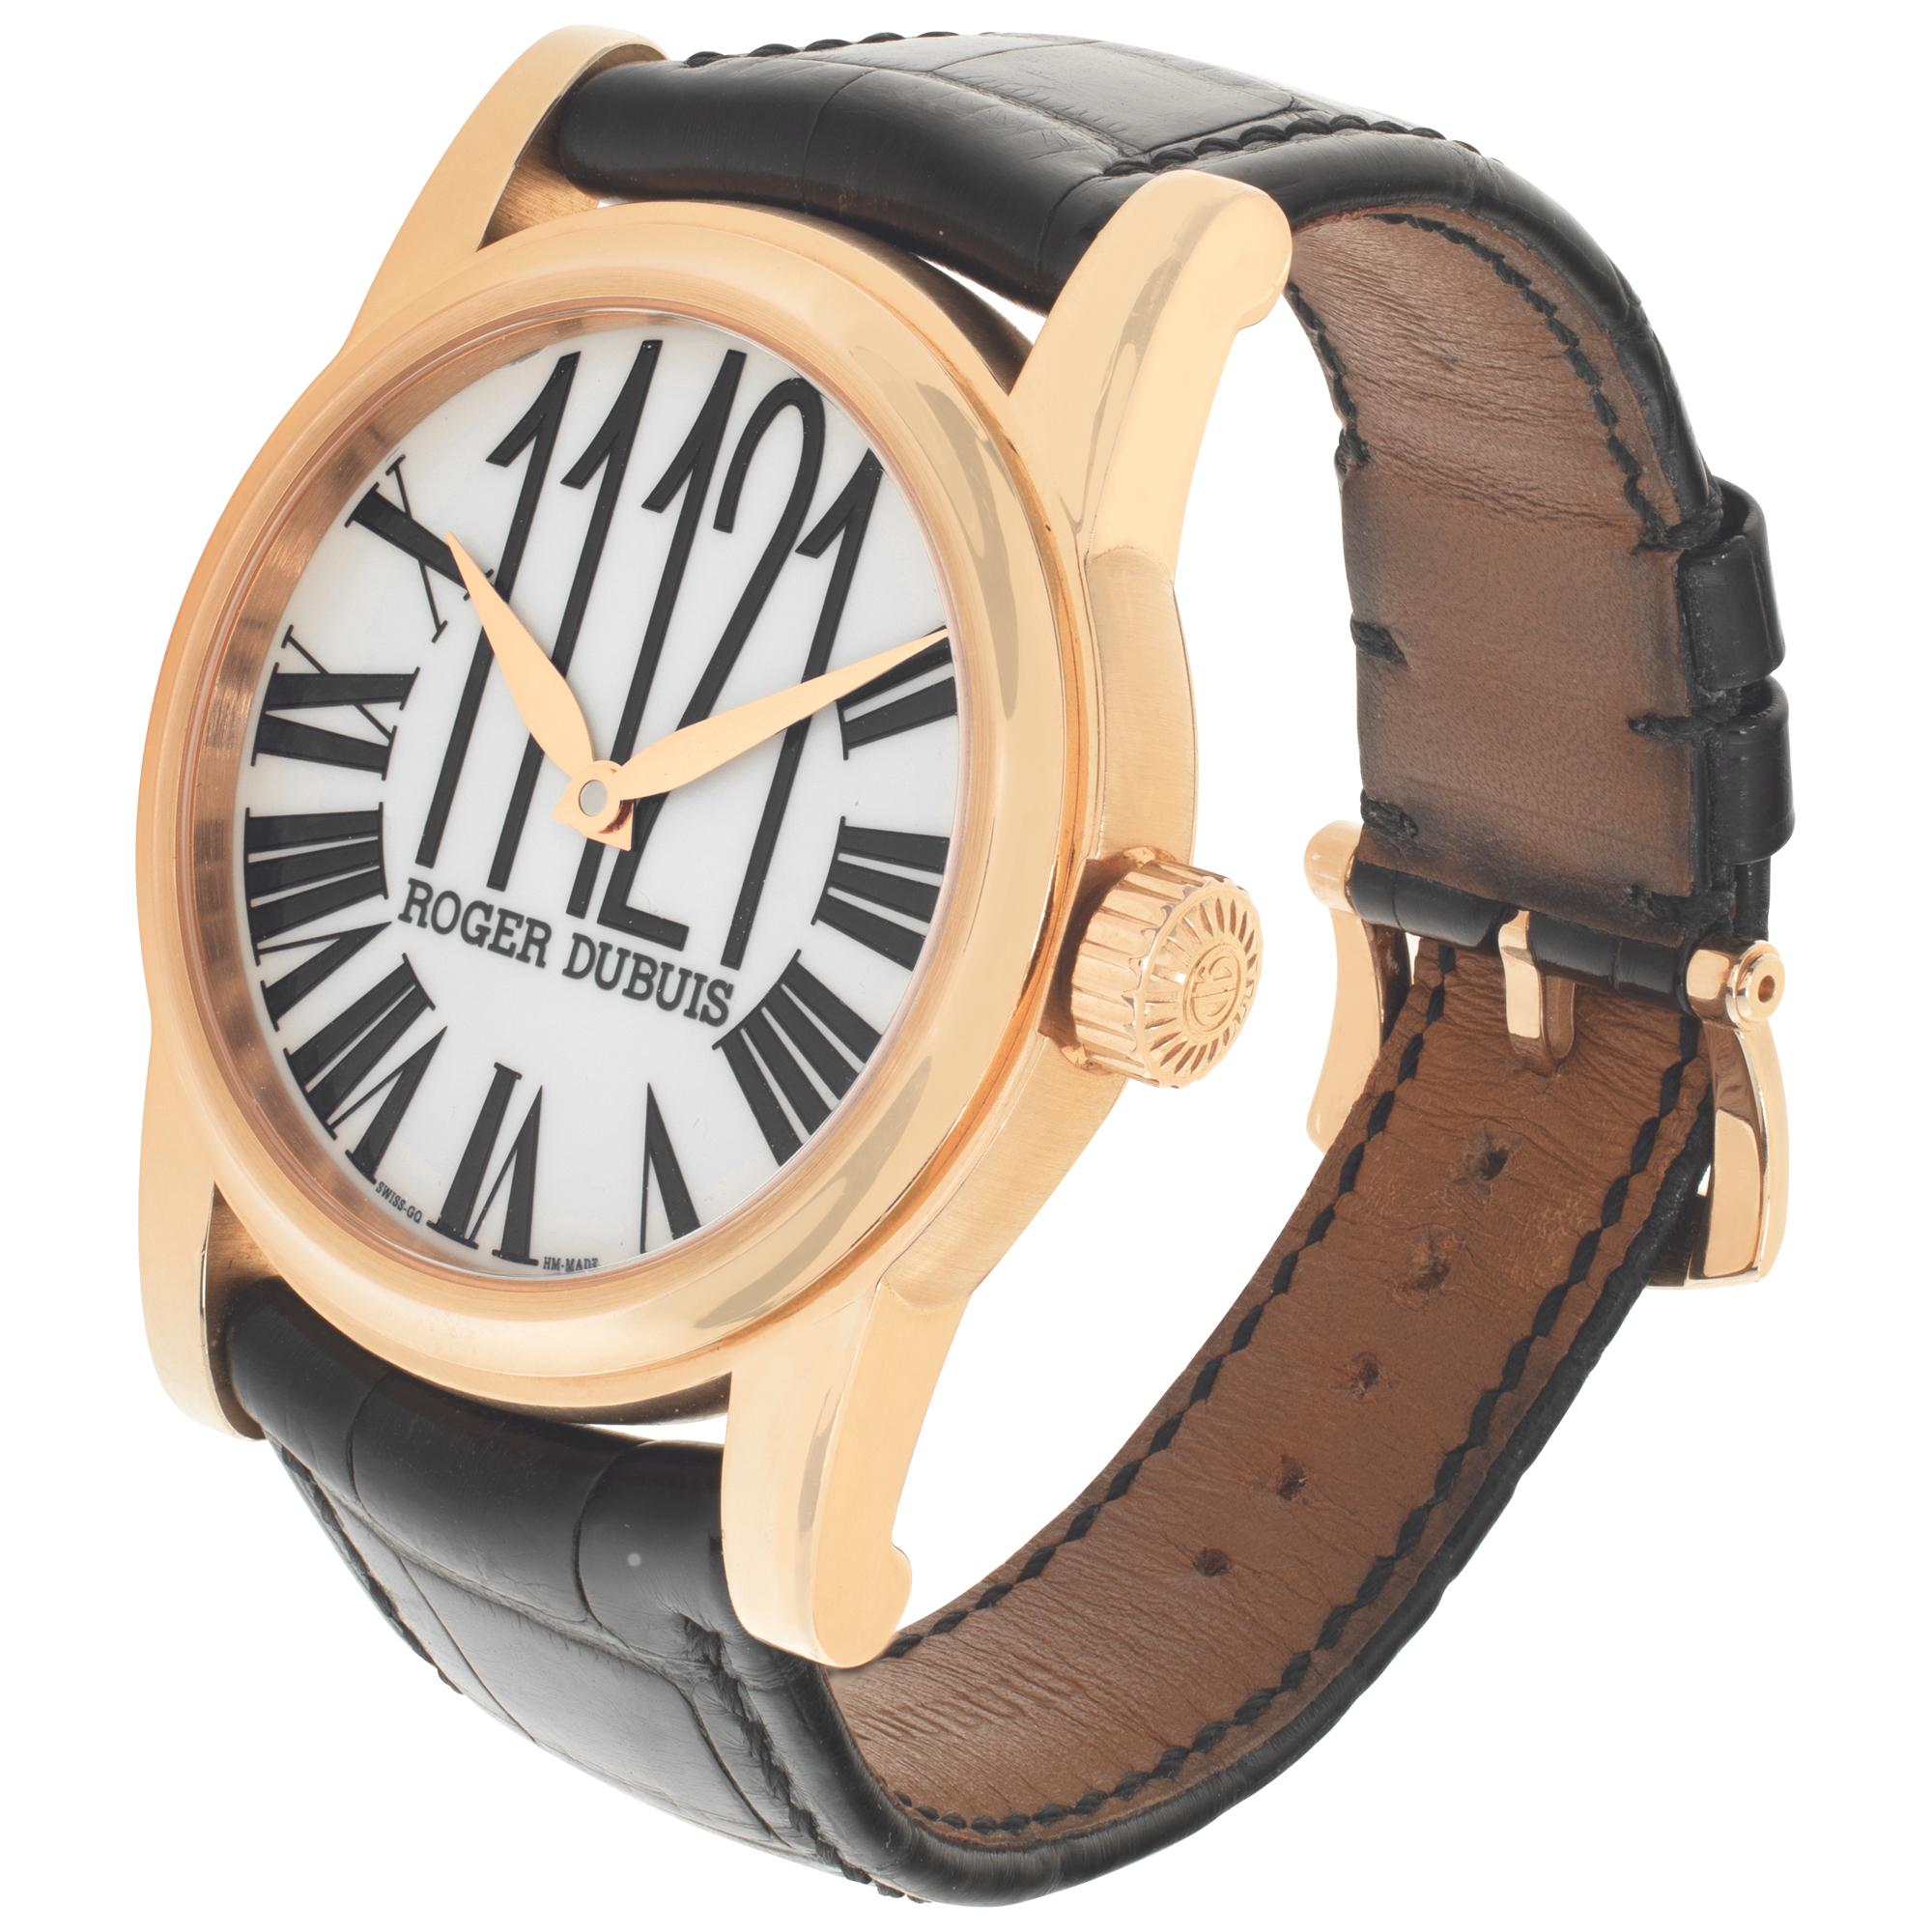 Roger Dubuis Hommage in 18k rose gold on a black crocodile strap with a Roger Dubuis 18k rose gold tang buckle. The dial shows Roman numerals aside from the 